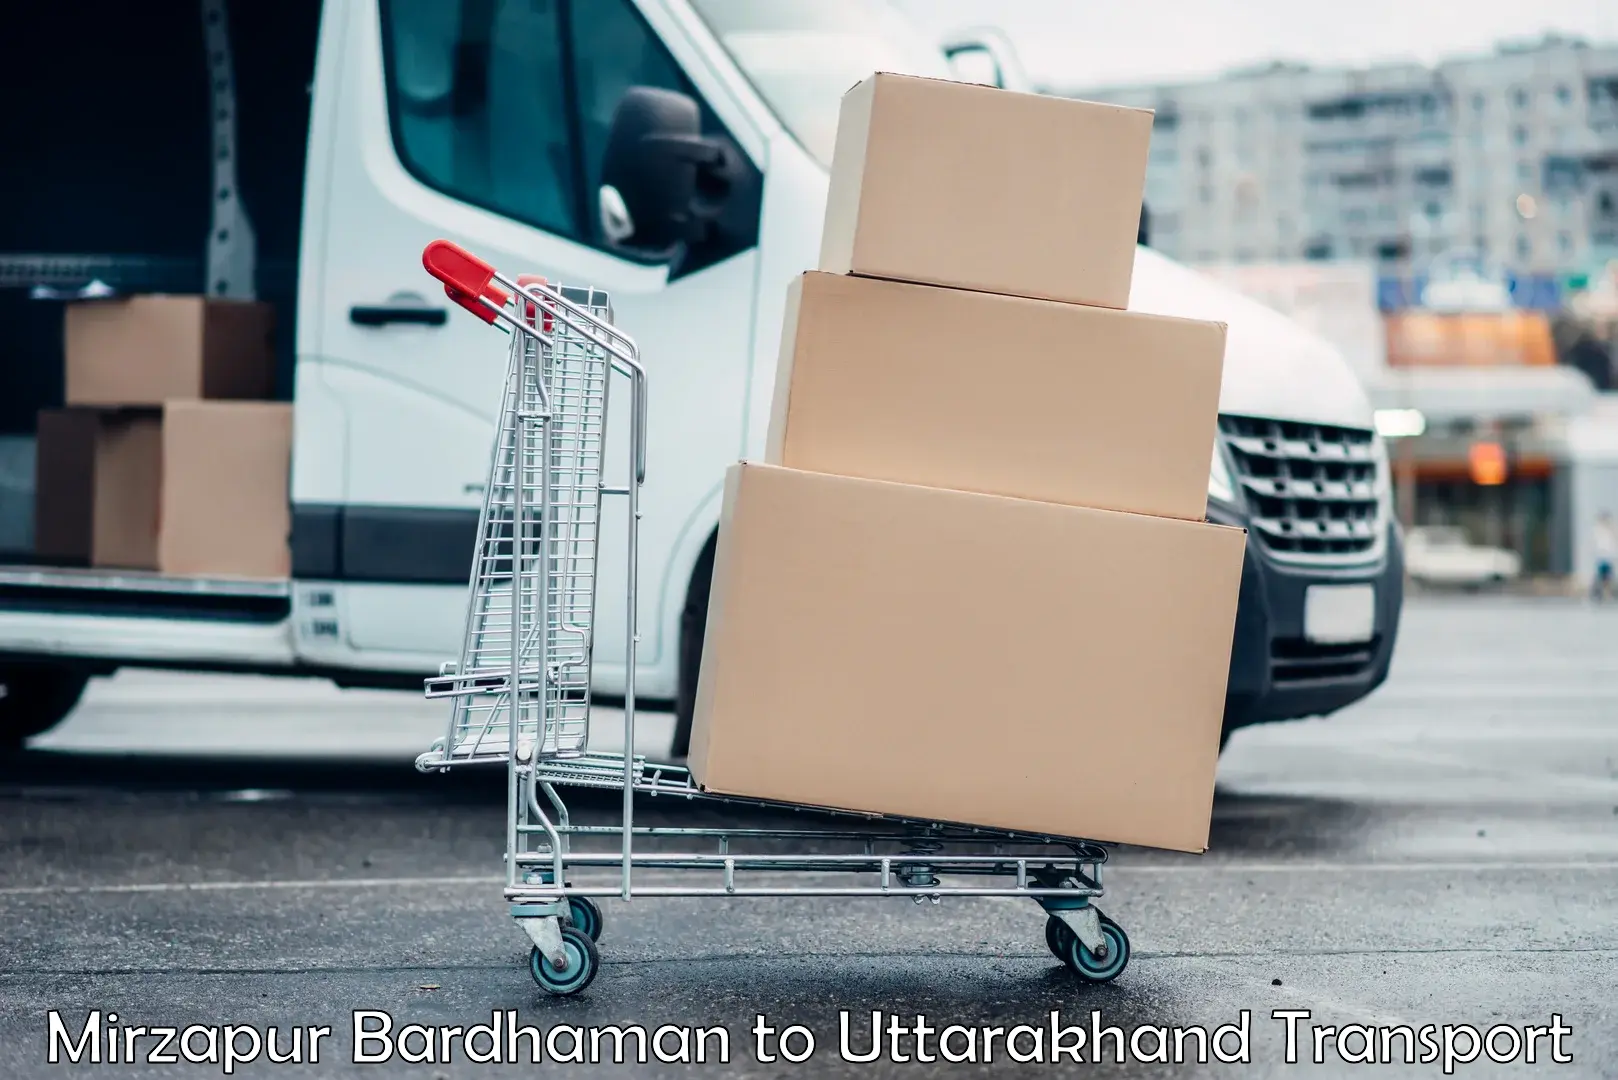 Parcel transport services Mirzapur Bardhaman to Roorkee